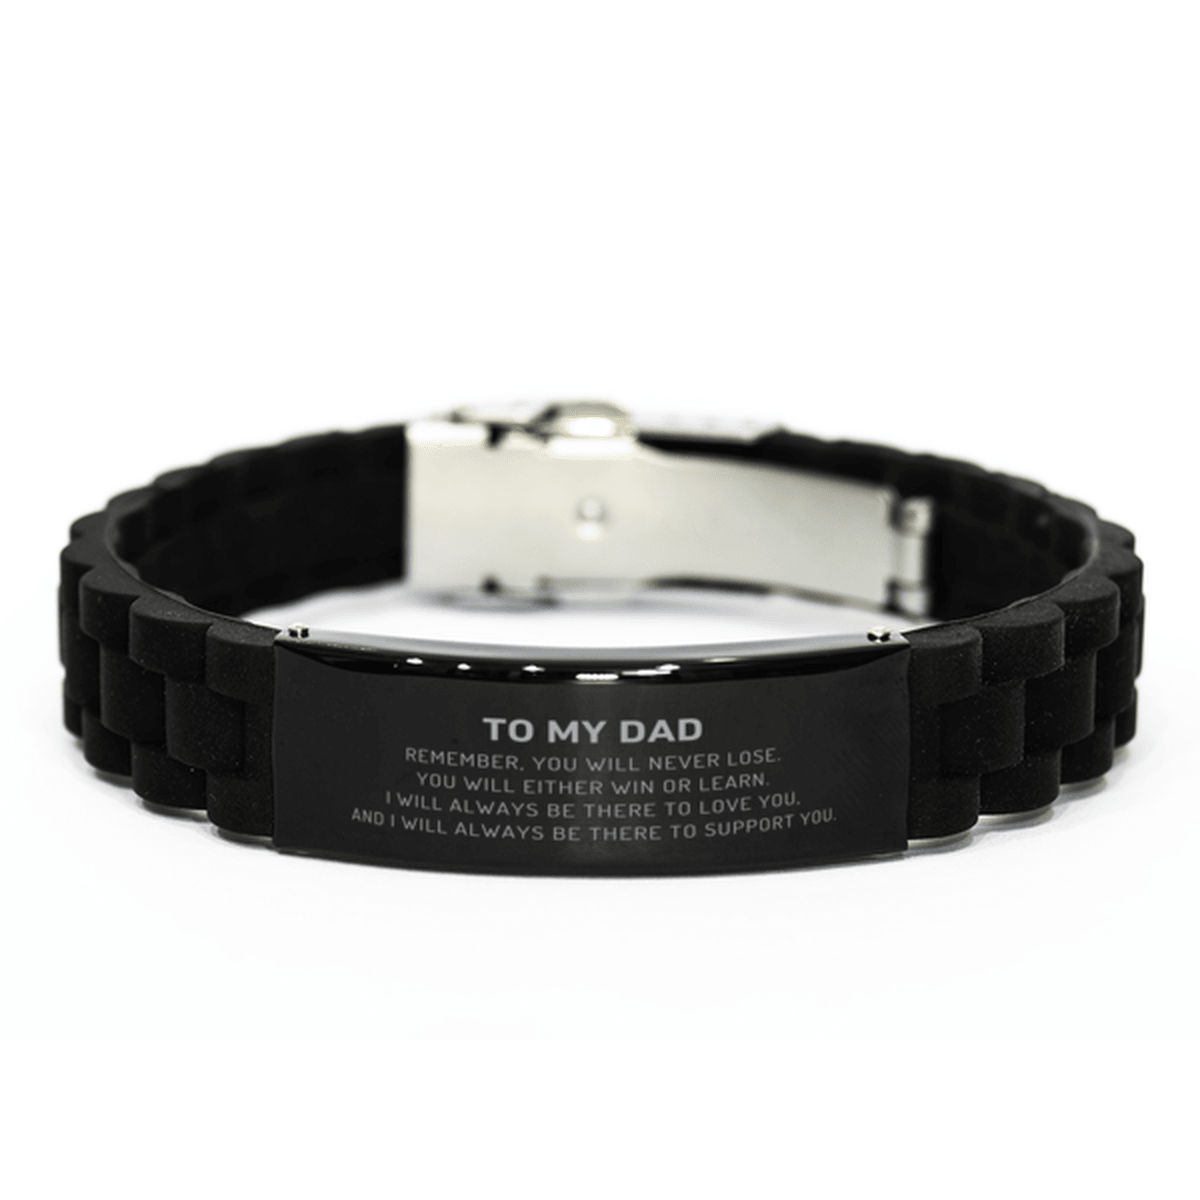 Dad Gifts, To My Dad Remember, you will never lose. You will either WIN or LEARN, Keepsake Black Glidelock Clasp Bracelet For Dad Engraved, Birthday Christmas Gifts Ideas For Dad X-mas Gifts - Mallard Moon Gift Shop